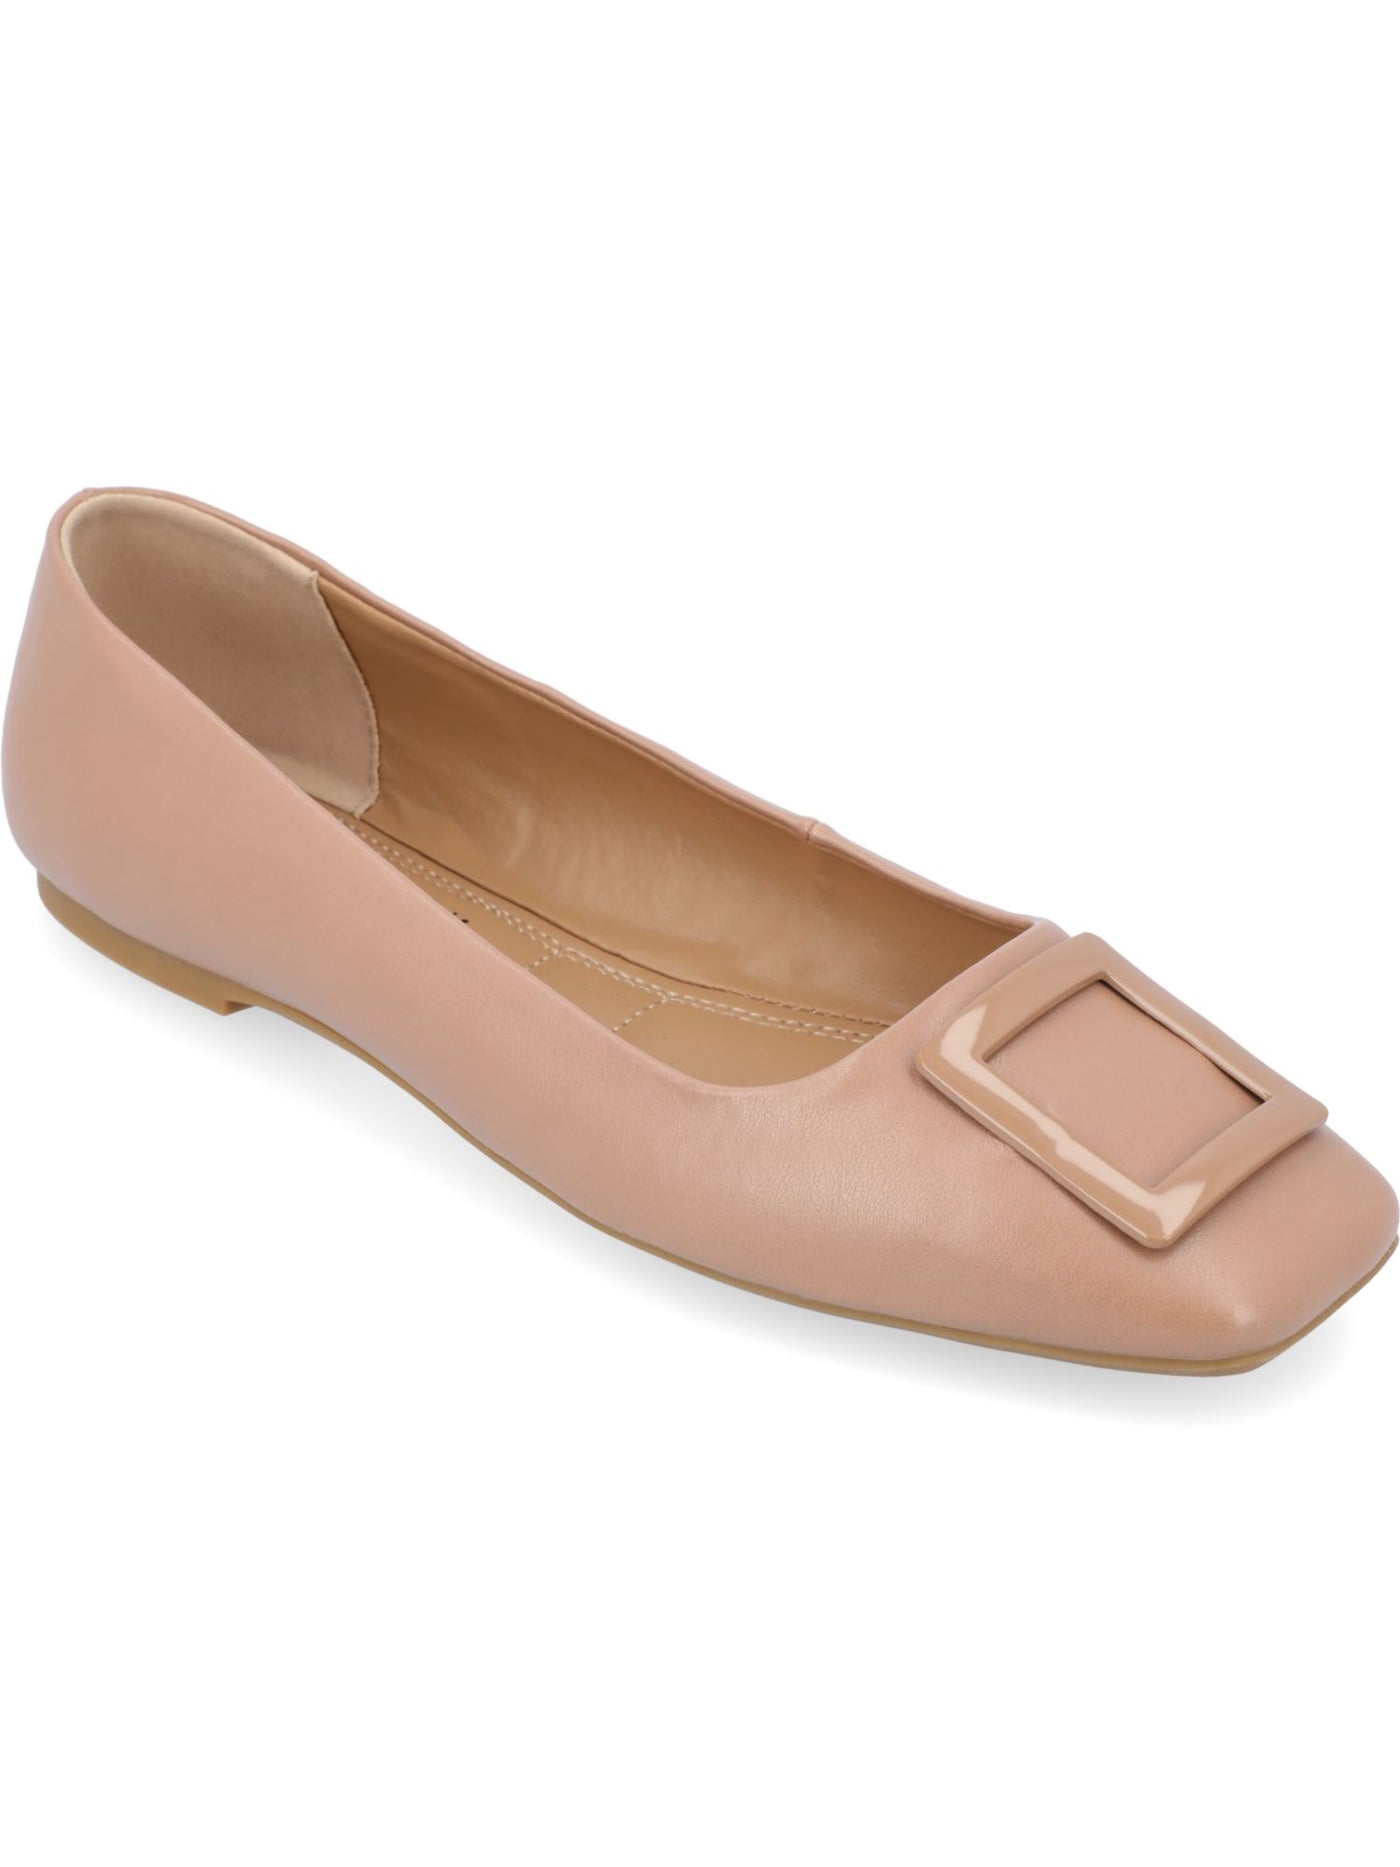 JOURNEE COLLECTION Womens Beige Buckle Accent Cushioned Zimia Square Toe Slip On Ballet Flats 8.5